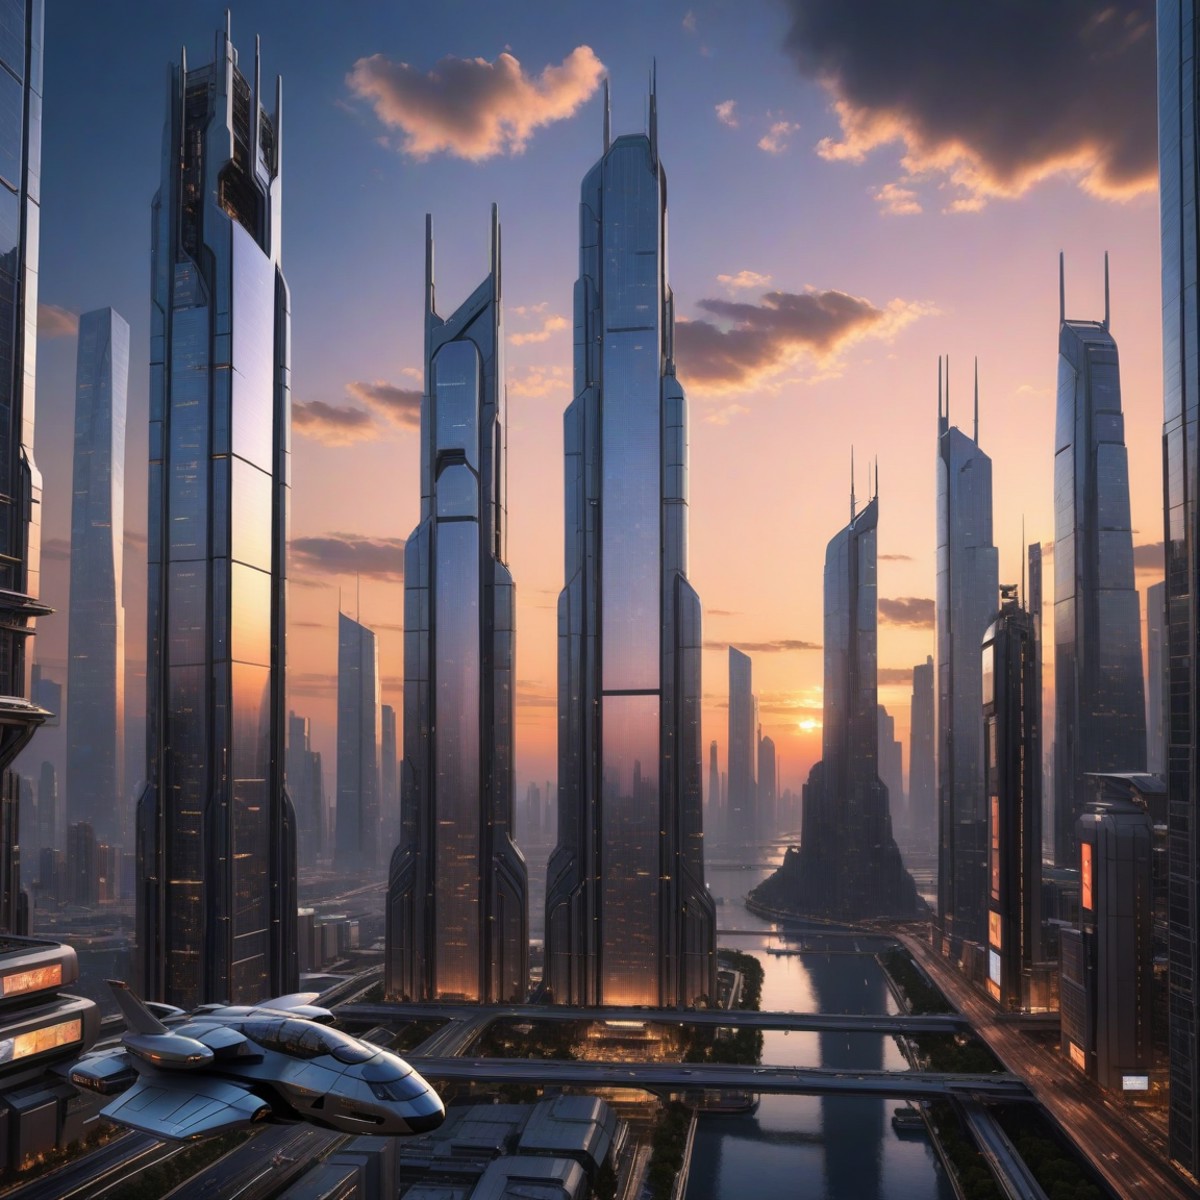 A futuristic cityscape at dusk, depicted in photorealistic detail, showcases towering glass and steel skyscrapers. The air...